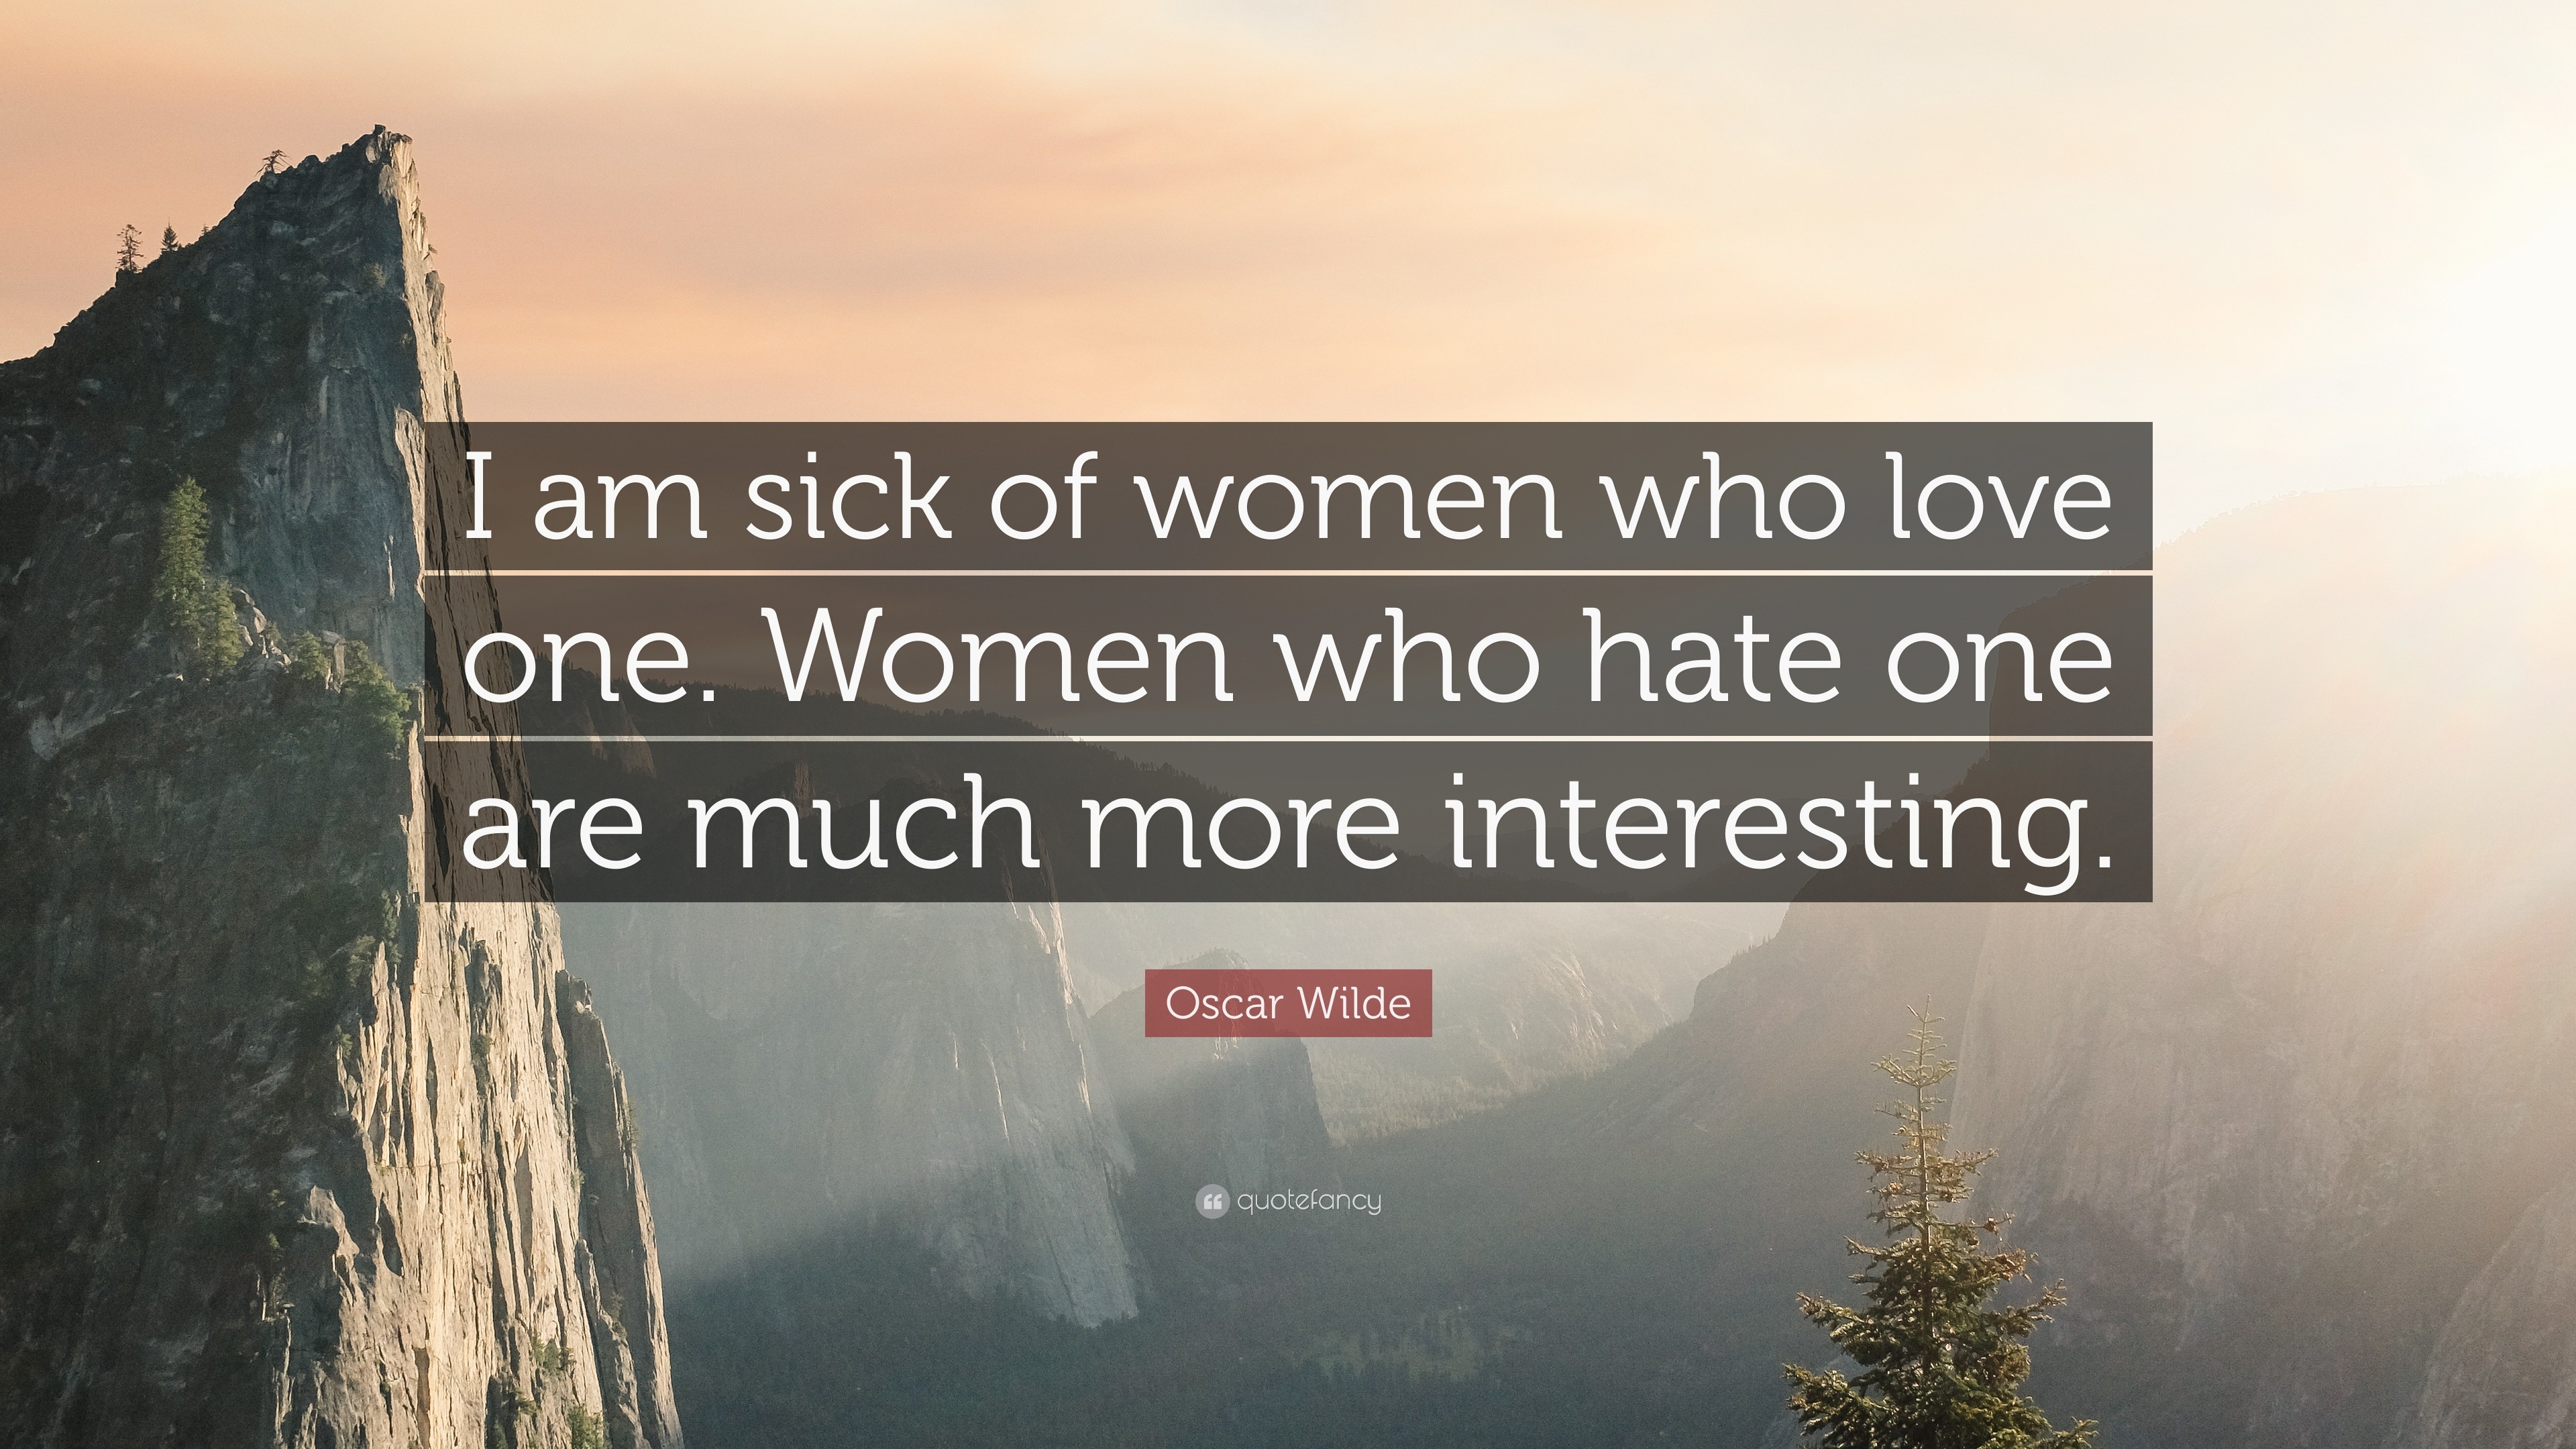 Oscar Wilde Quote “I am sick of women who love one Women who